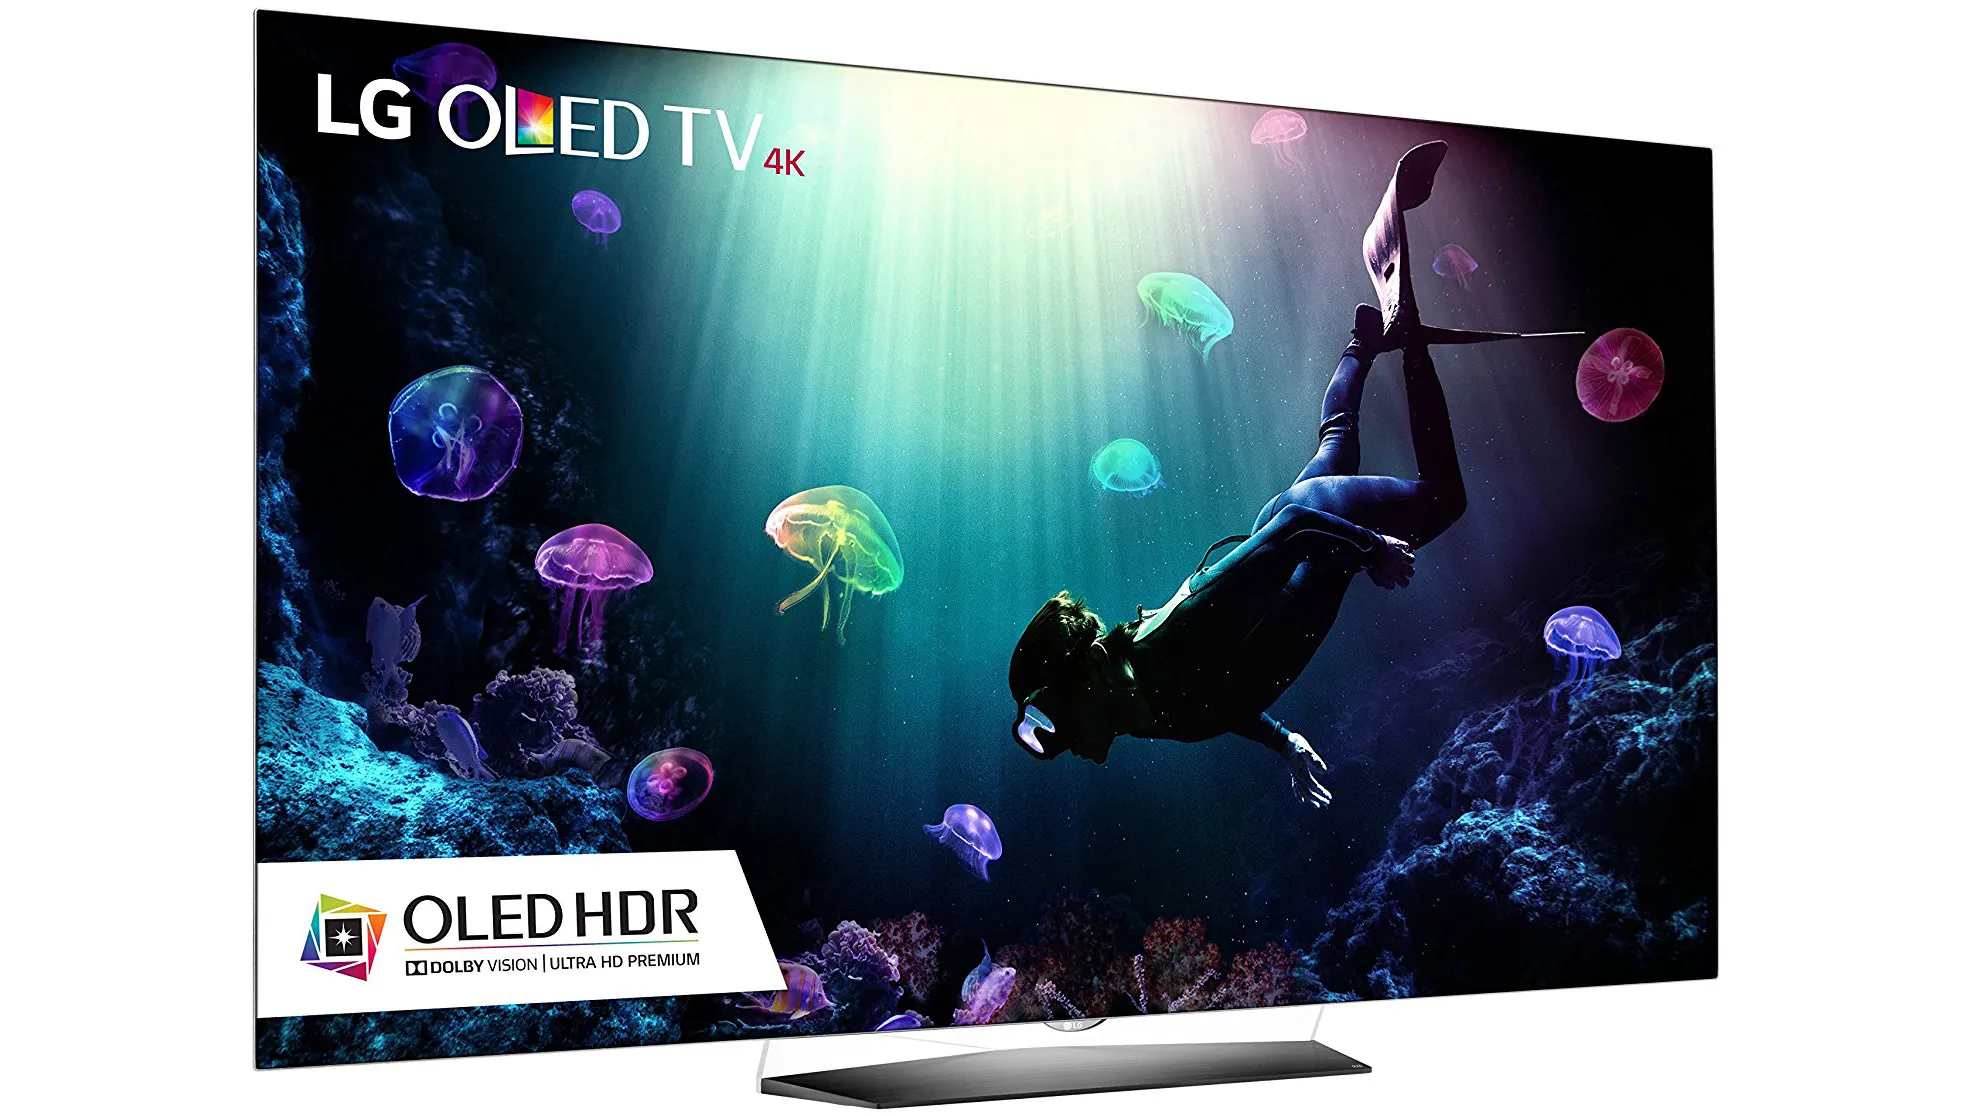 What Is LG’s Best OLED TV For 2017